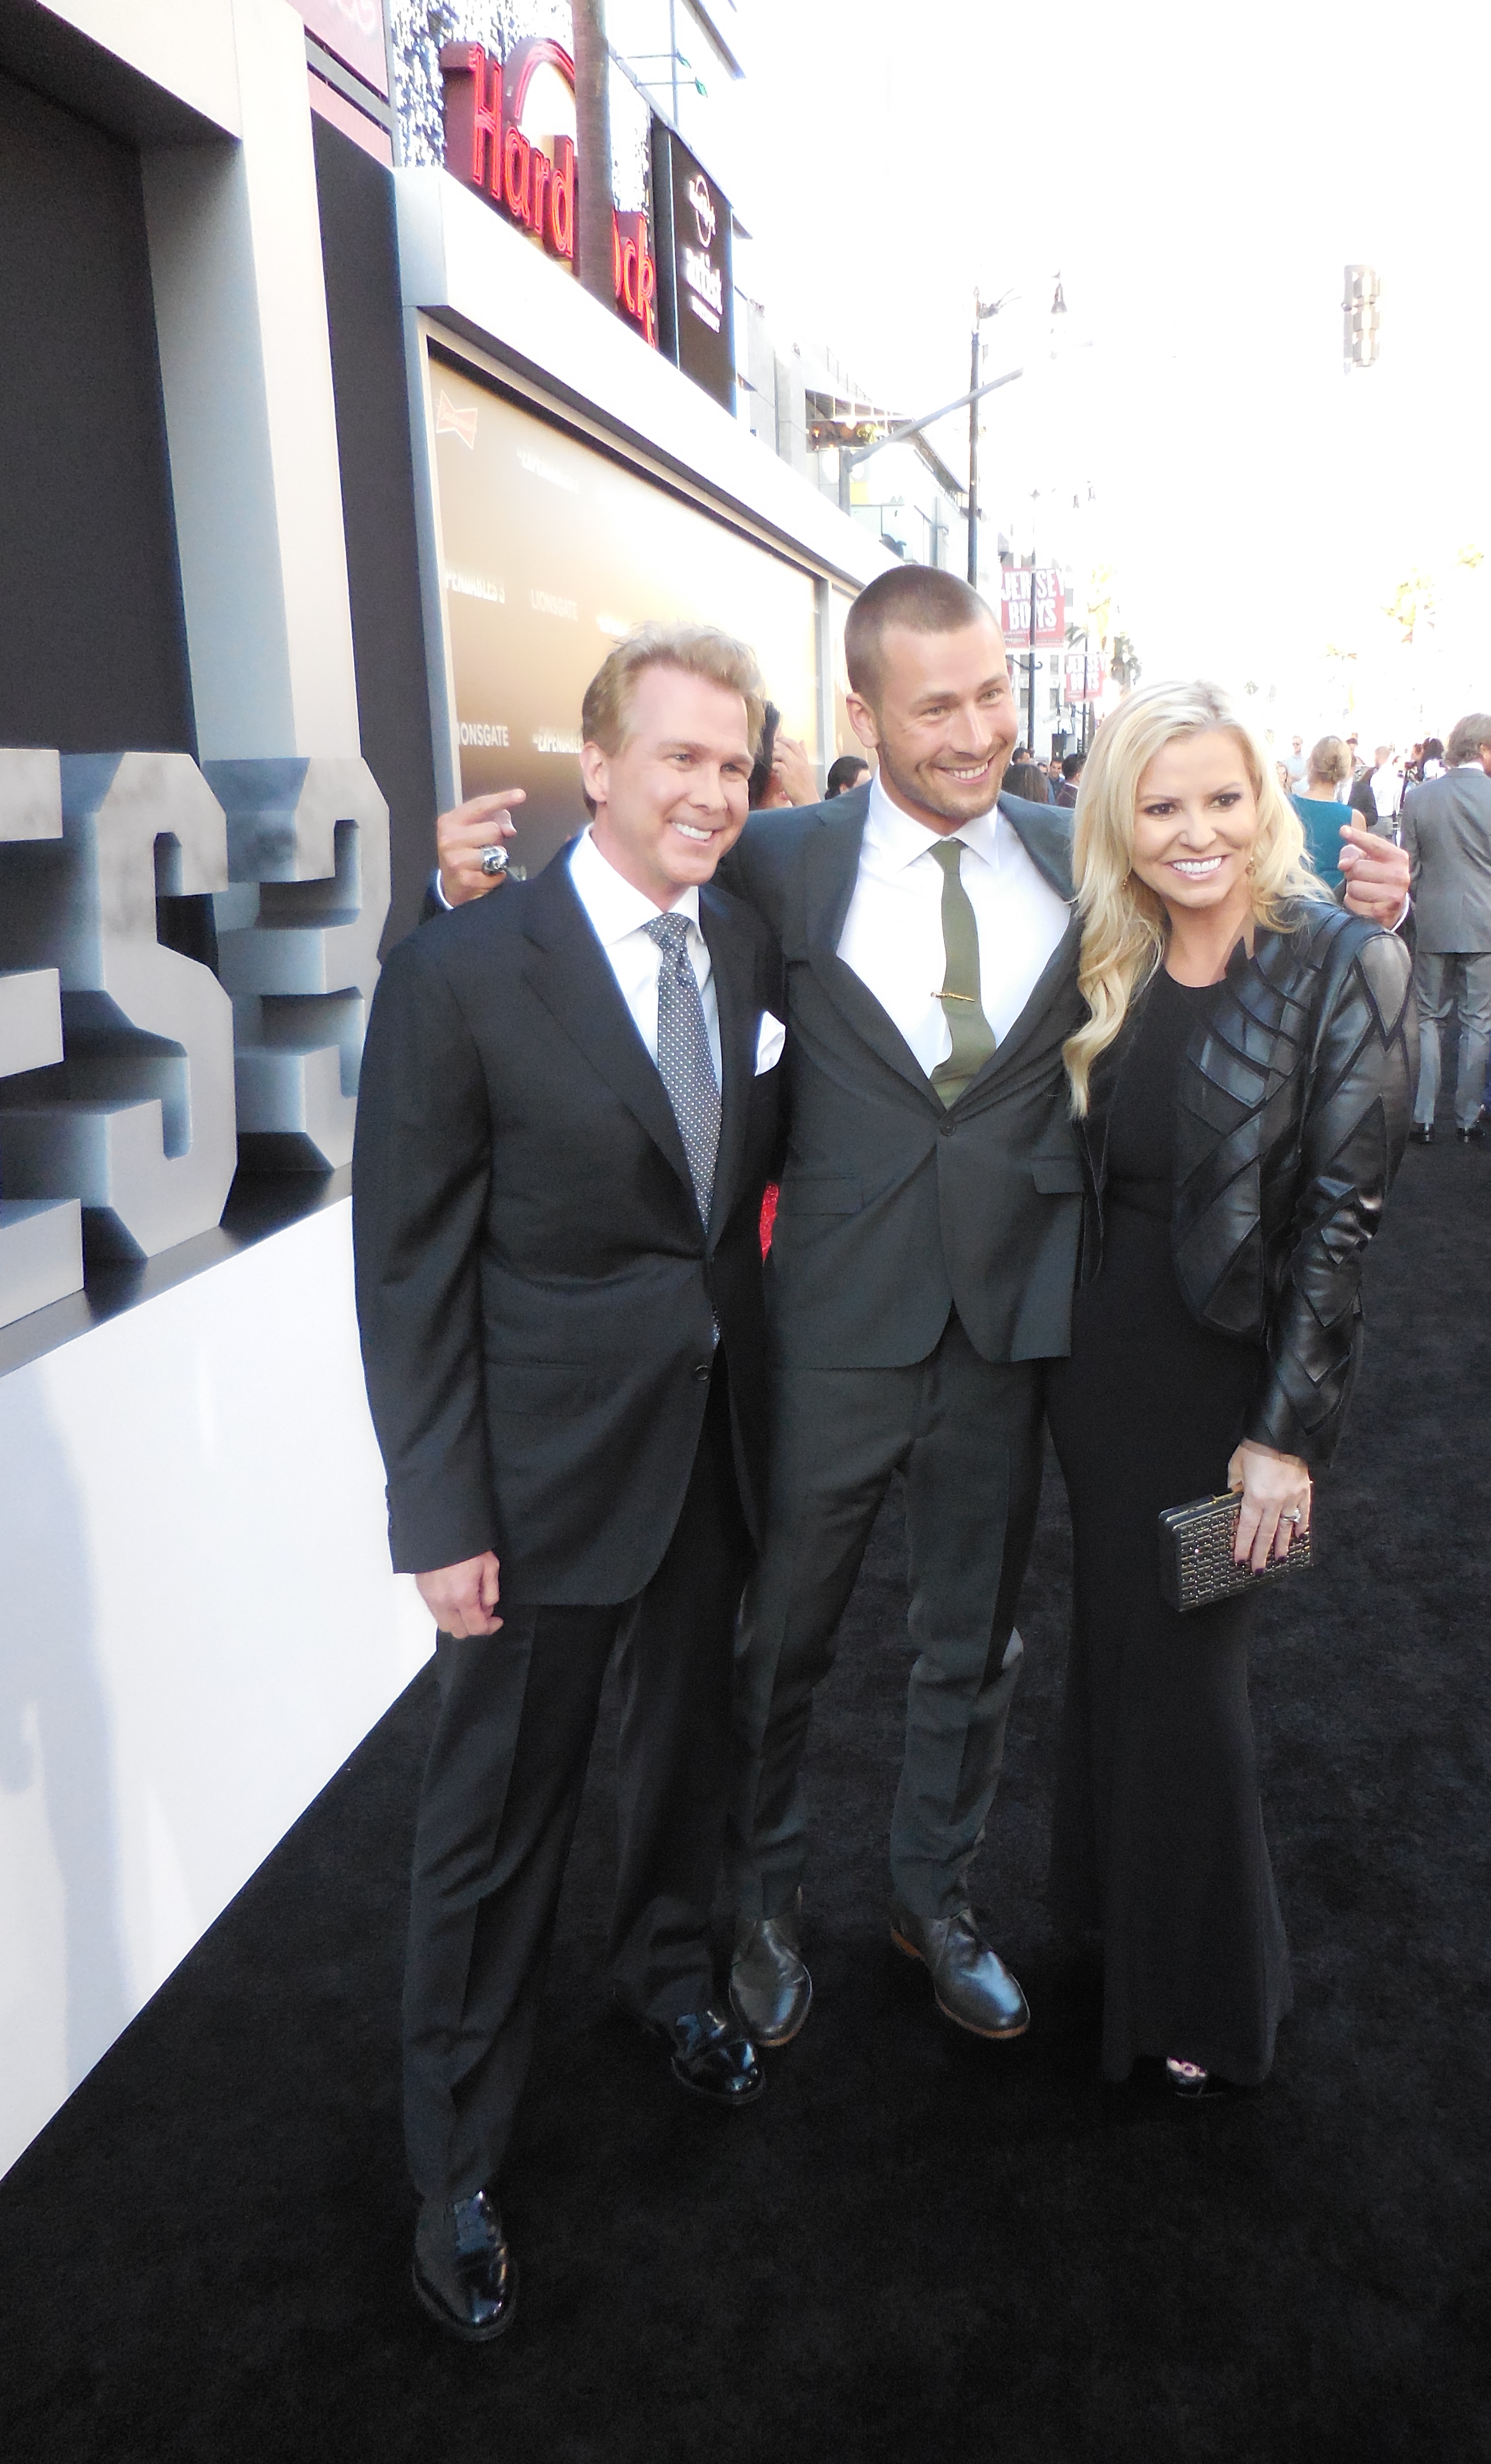 Creighton Rothenberger, Glen Powell and Katrin Benedikt at The Expendables 3 premiere - TCL Chinese Theatre on August 15, 2014 in Hollywood, California.